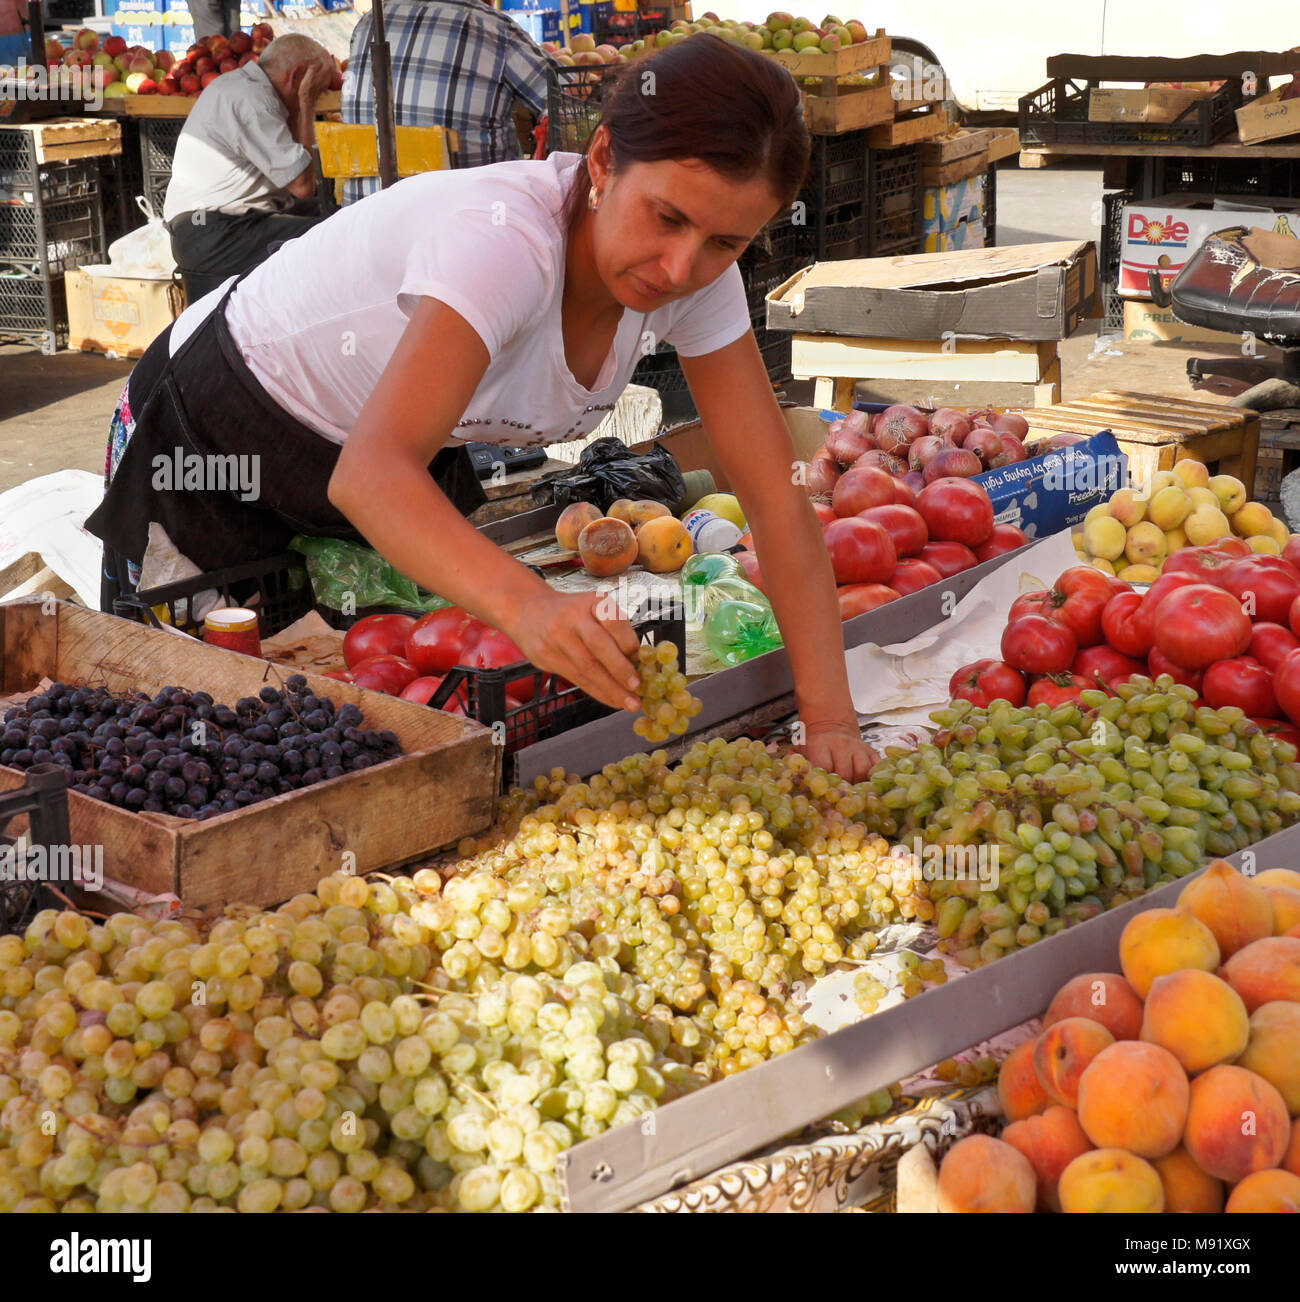 A woman selling fresh produce, including grapes, peaches, and tomatoes, tidies her display at the Dezerters' Bazaar open-air market, Tbilisi, Georgia Stock Photo